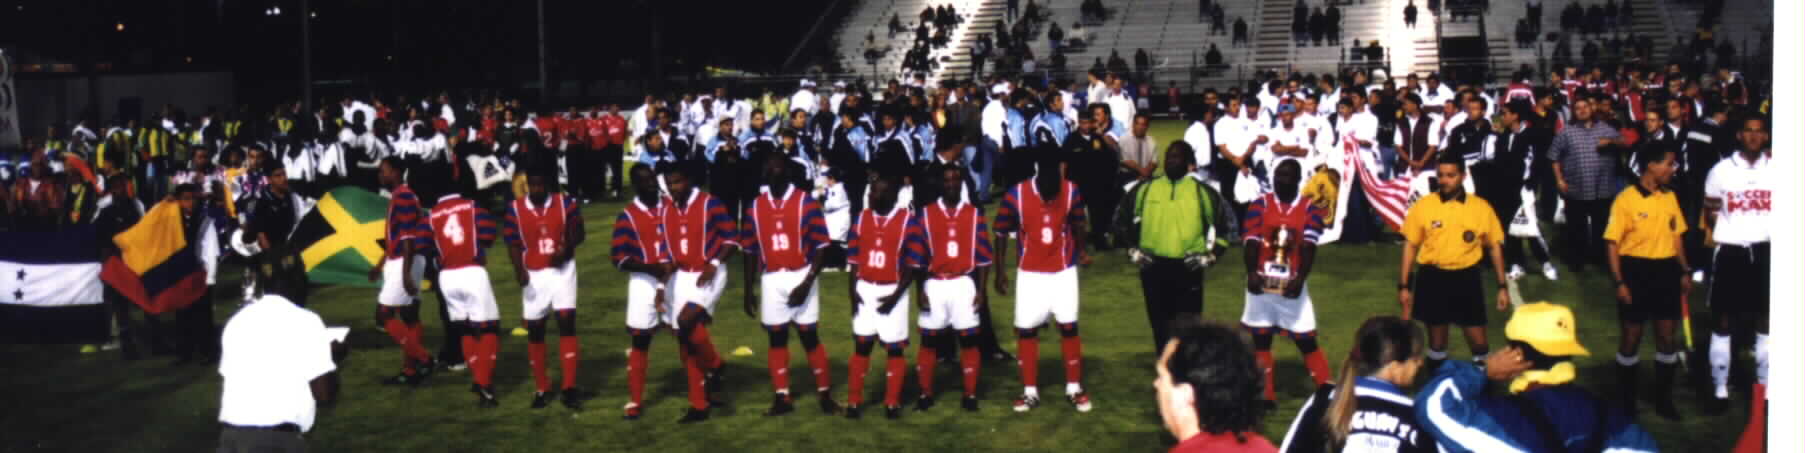 (Equipe Haitienne Defending Champion in Copa Latina 2000 (Hialeah, Florida))Picture courtesy of Noe Dorestant... Give credit where credit is due.